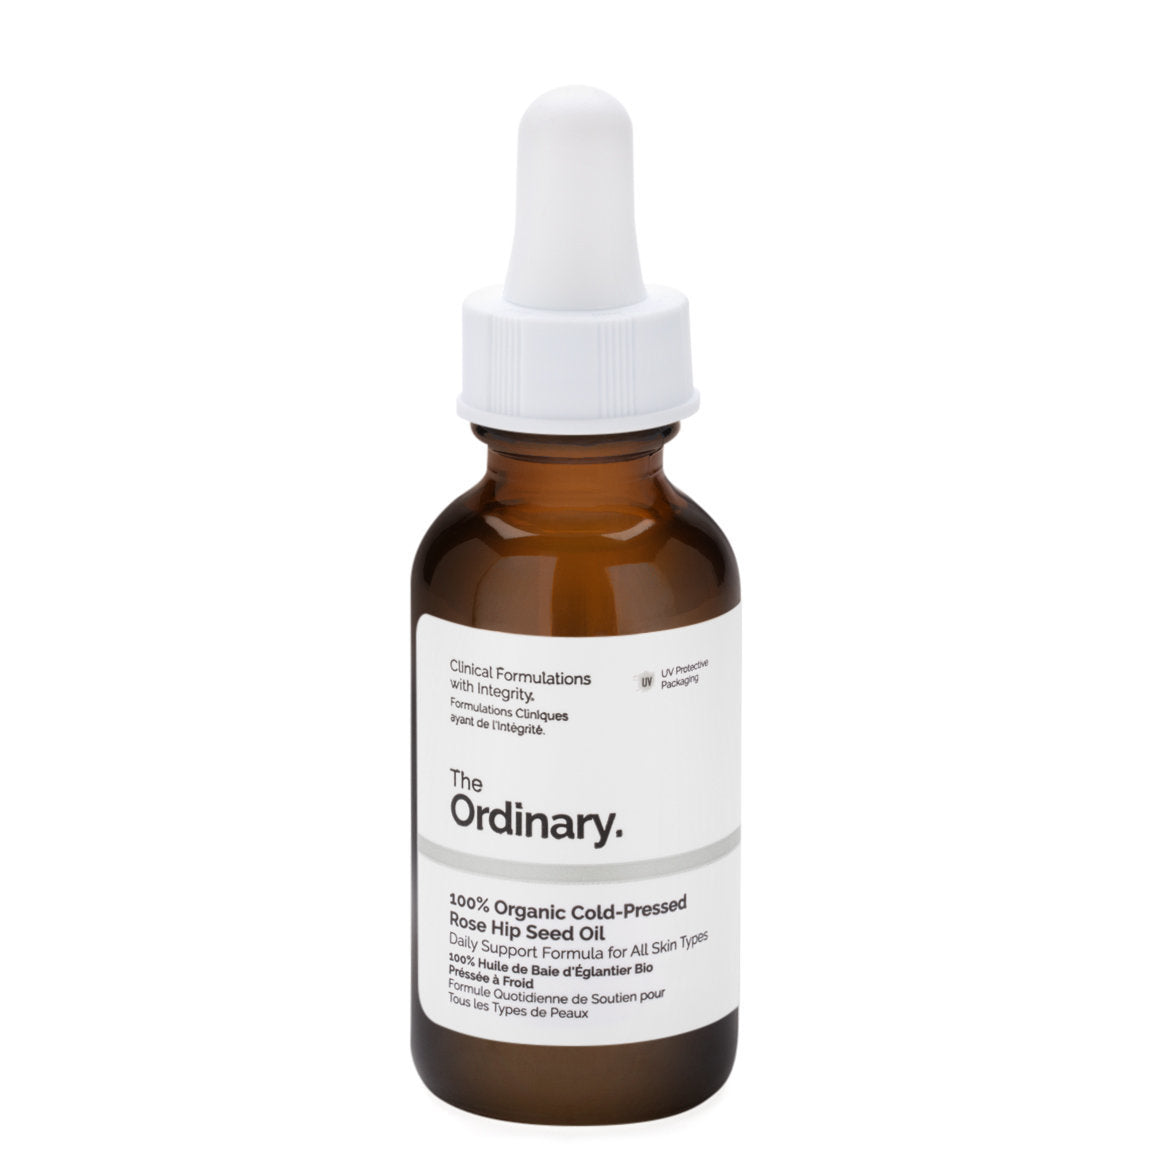 100% Organic cold-pressed rose hip seed oil the Ordinary - APGMakeupSolution